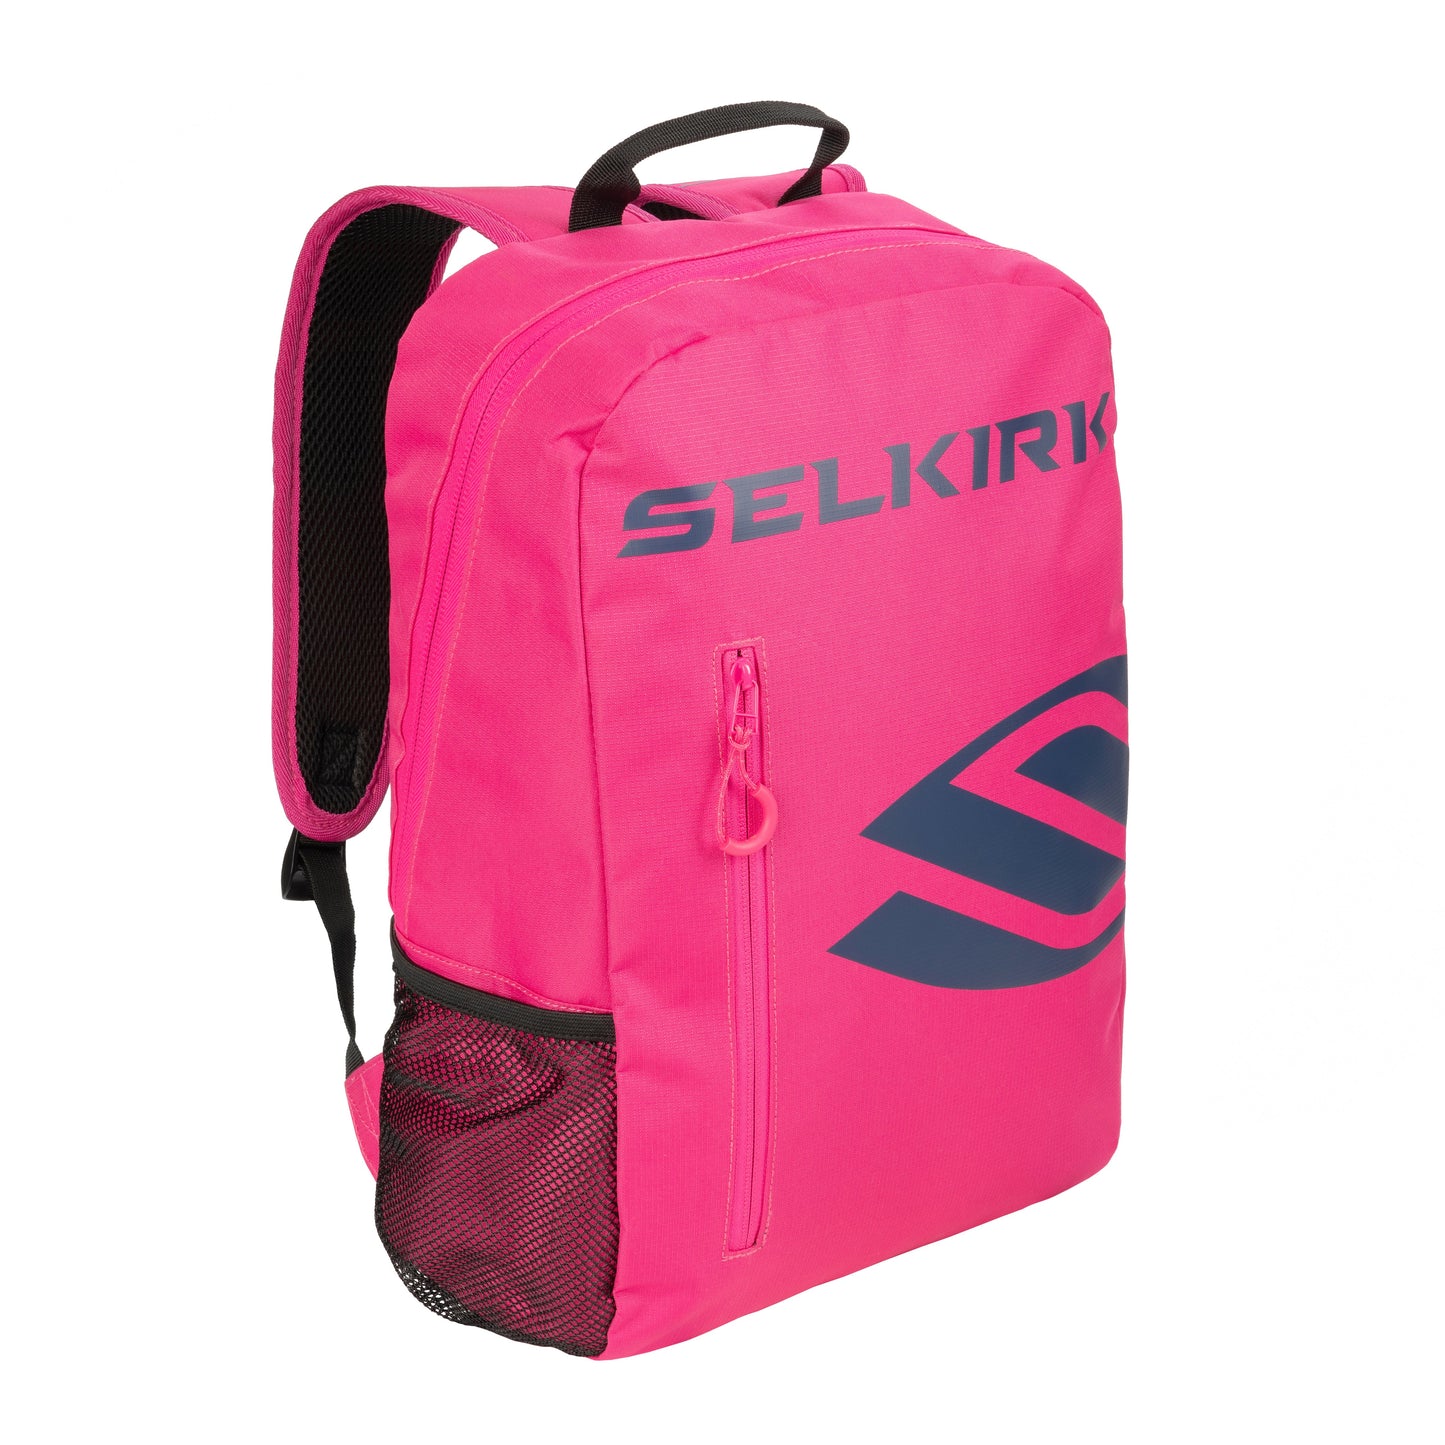 A Selkirk Core Series Day Backpack Pickleball Bag with the word Selkirk on it.